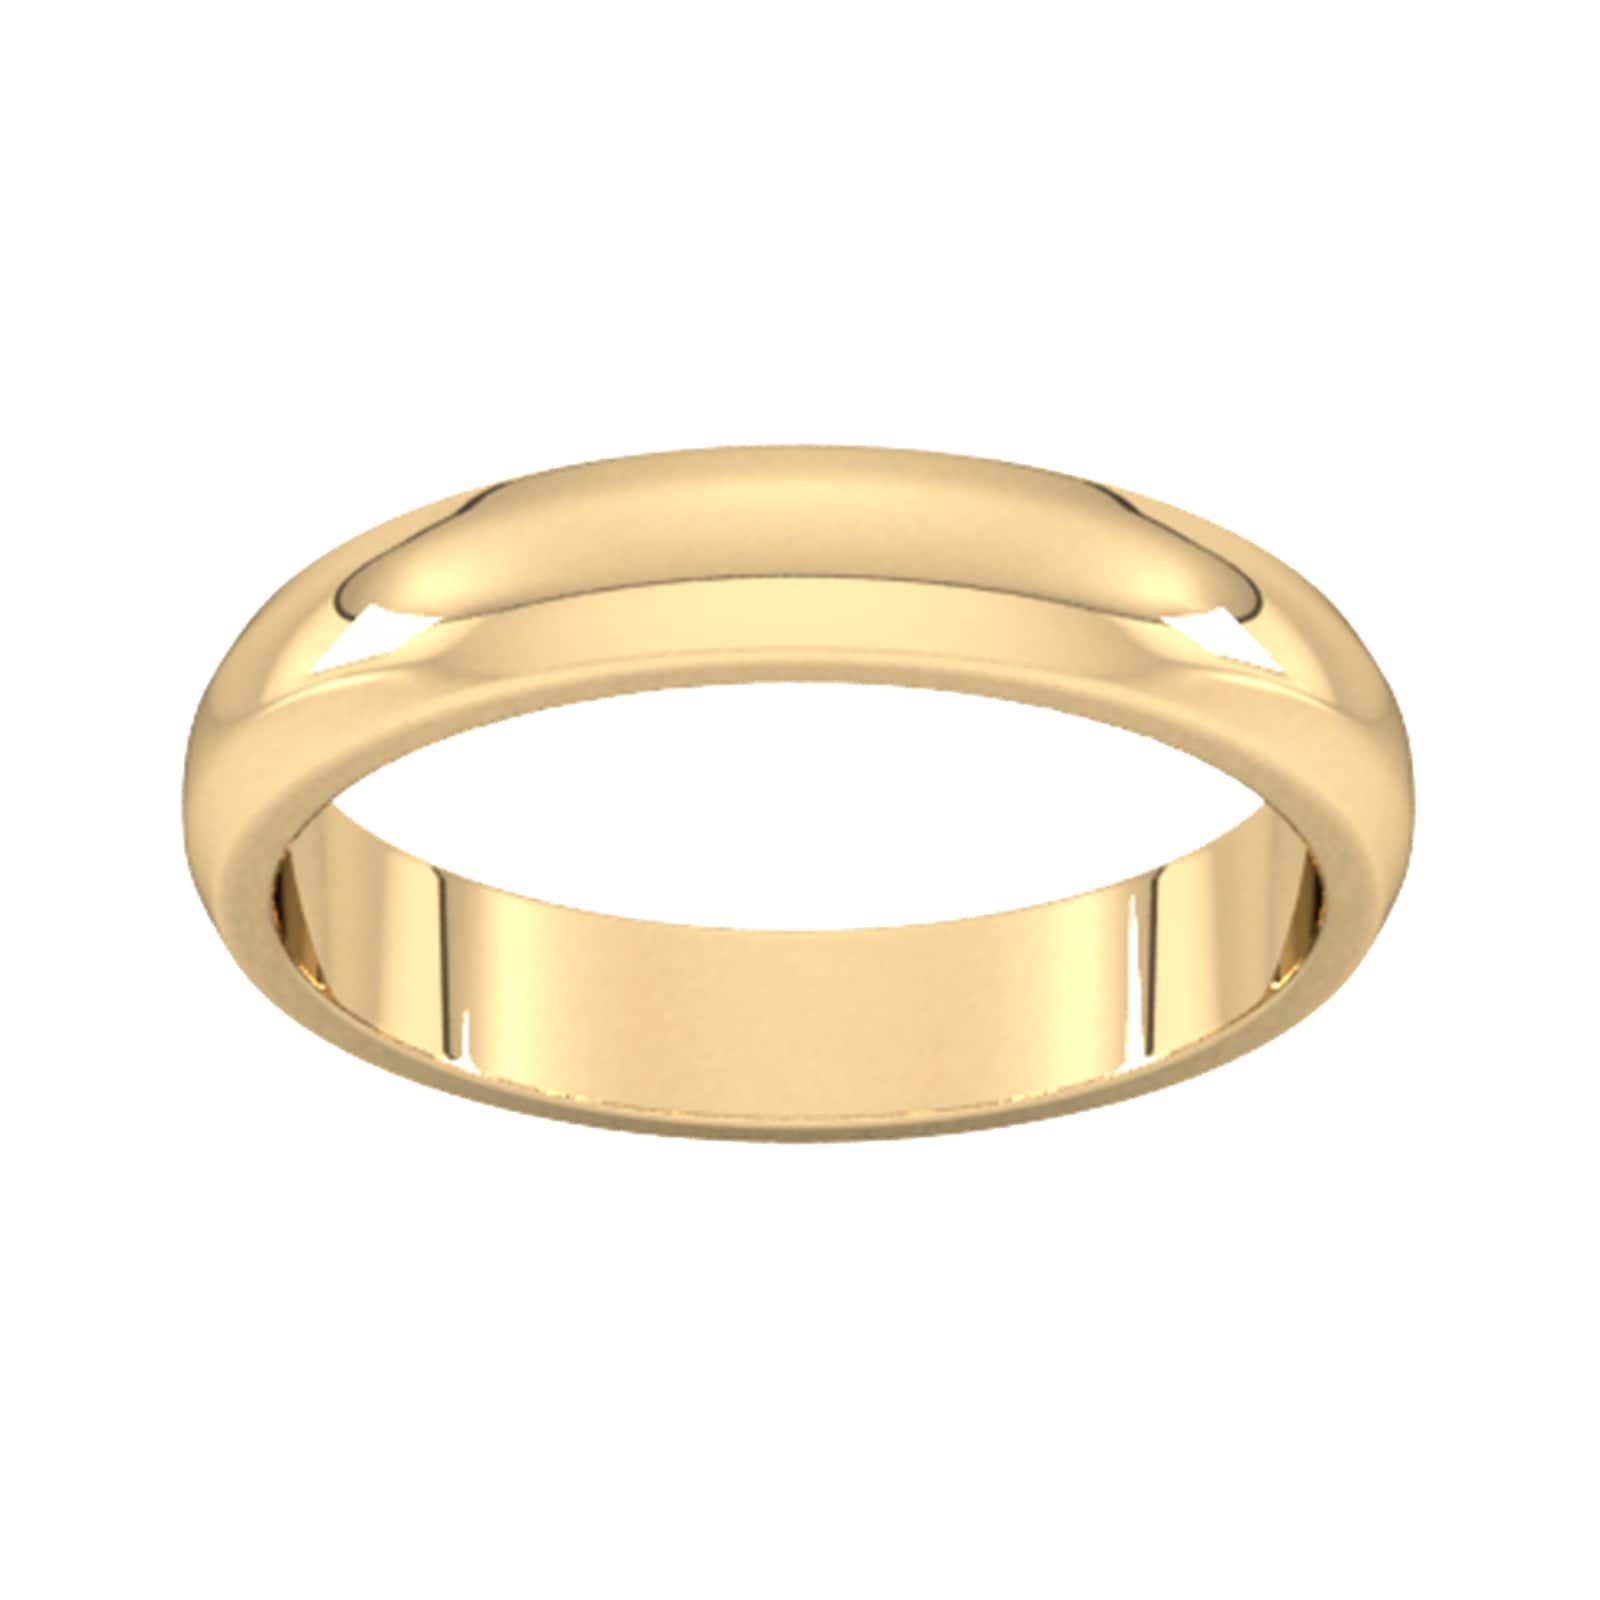 4mm D Shape Heavy Wedding Ring In 18 Carat Yellow Gold - Ring Size W